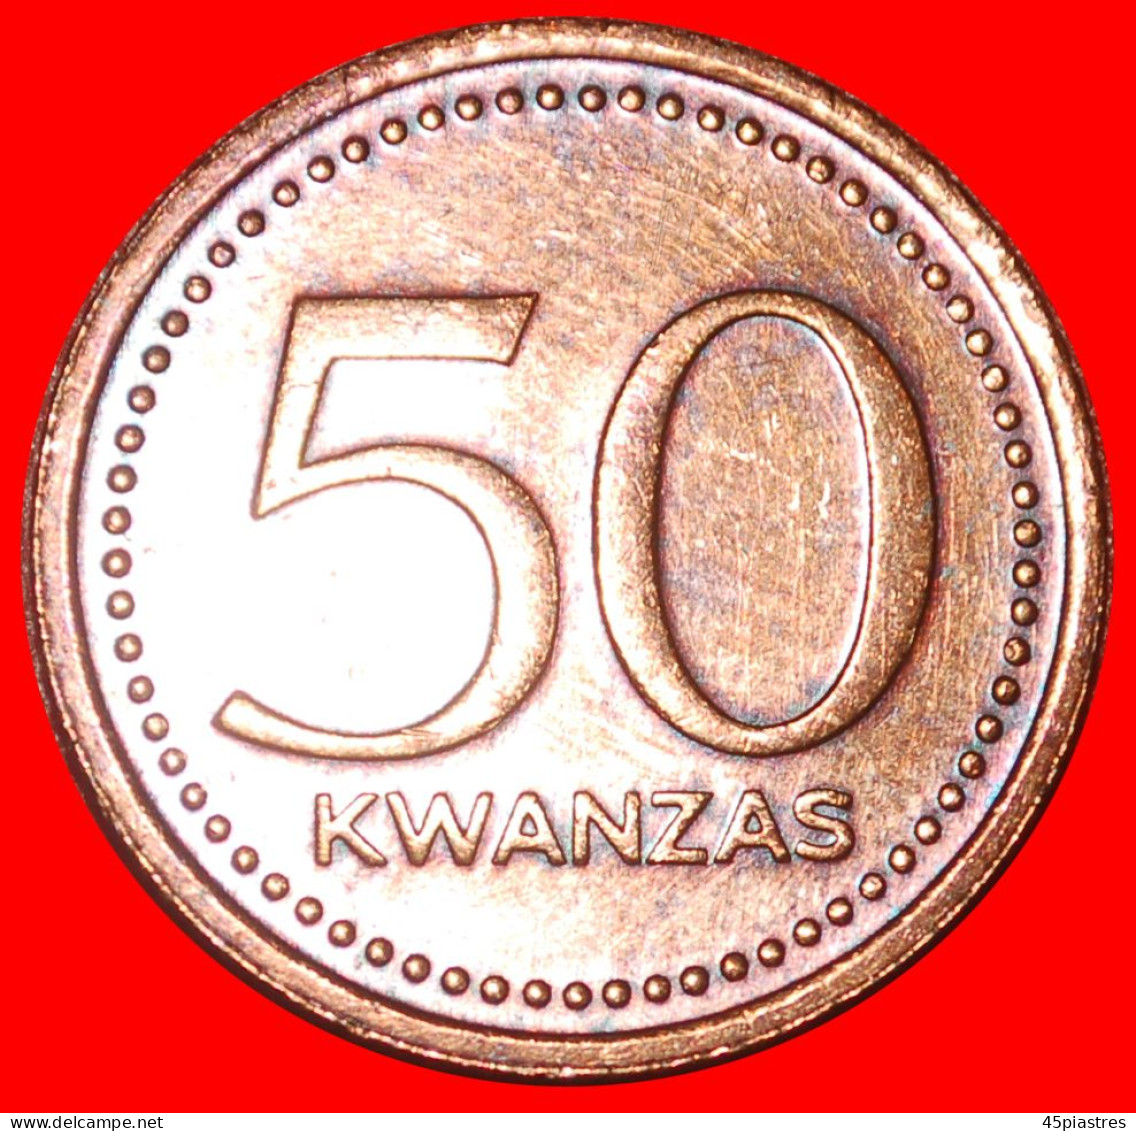 * GREAT BRITAIN (1978-1991): ANGOLA  50 KWANZAS! 1975 FREEDOM FROM PORTUGAL! RARE COMMUNIST  · LOW START ·  NO RESERVE! - Angola